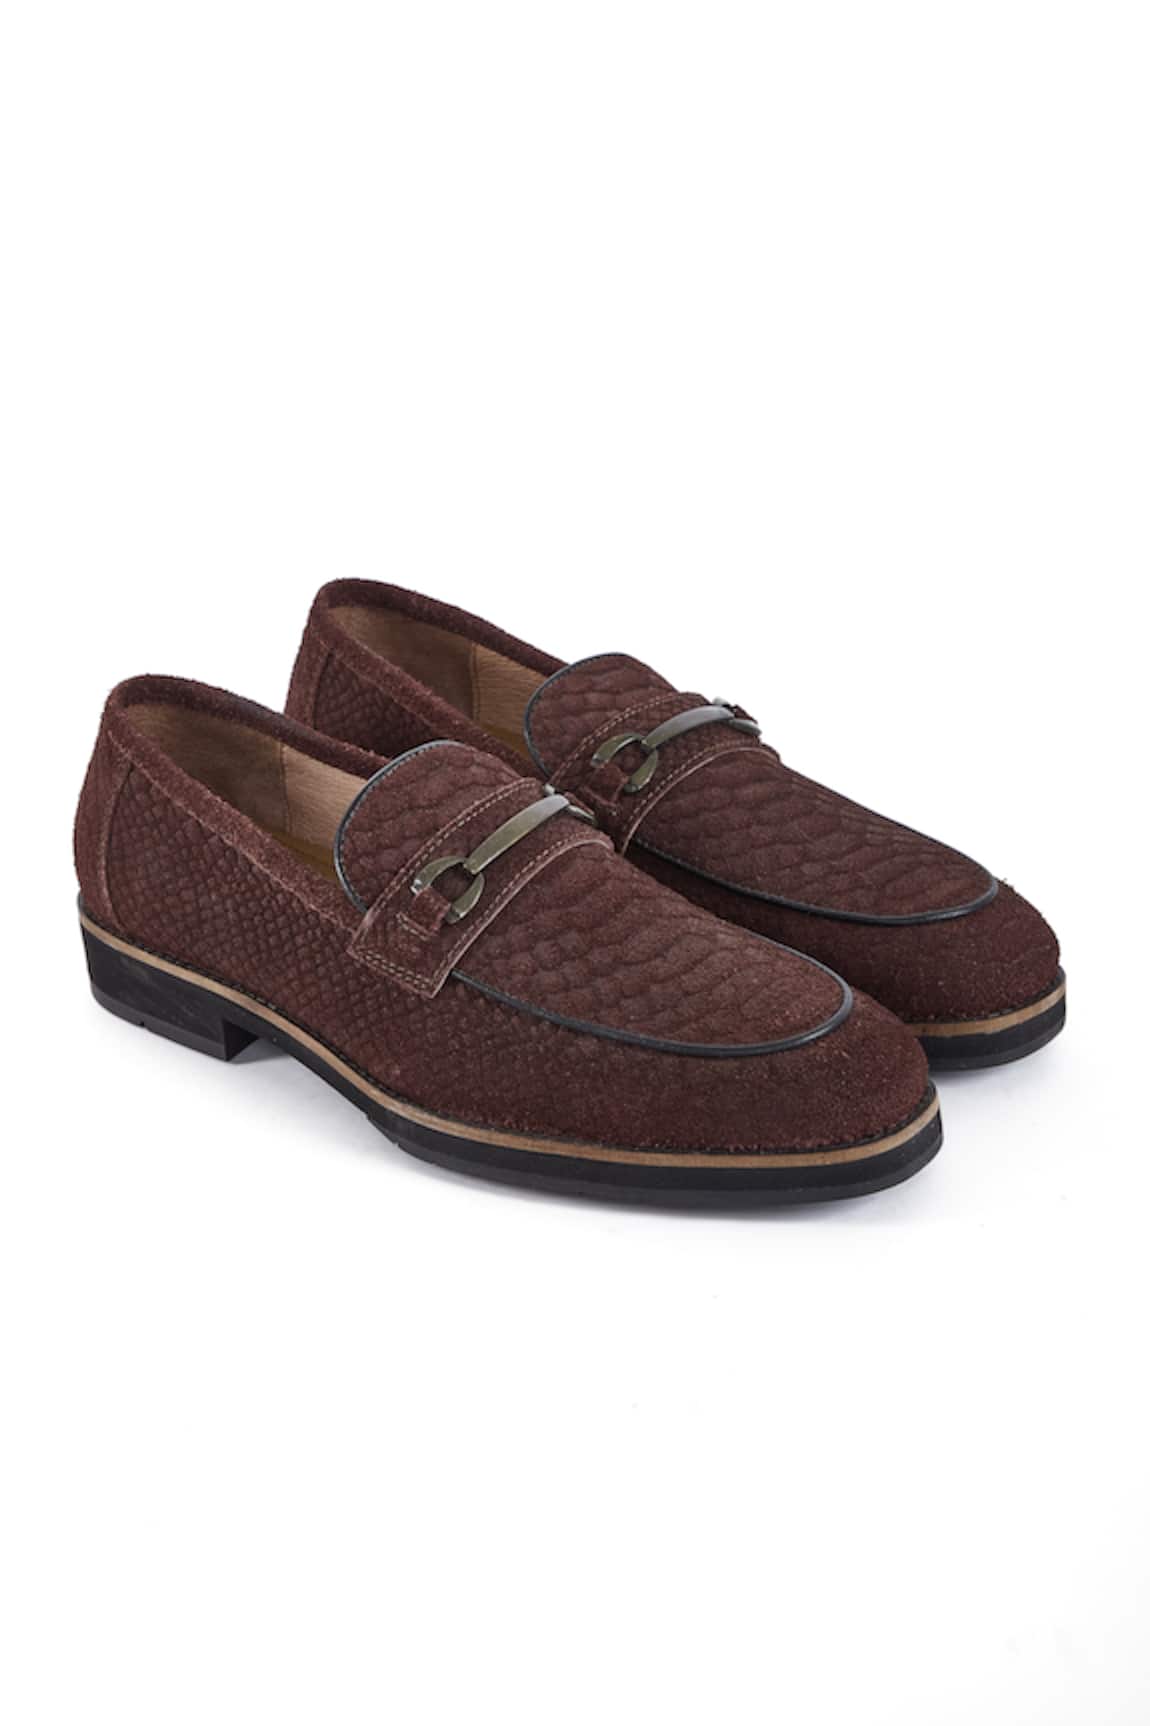 Hats Off Accessories Solid Leather Slip-On Loafers